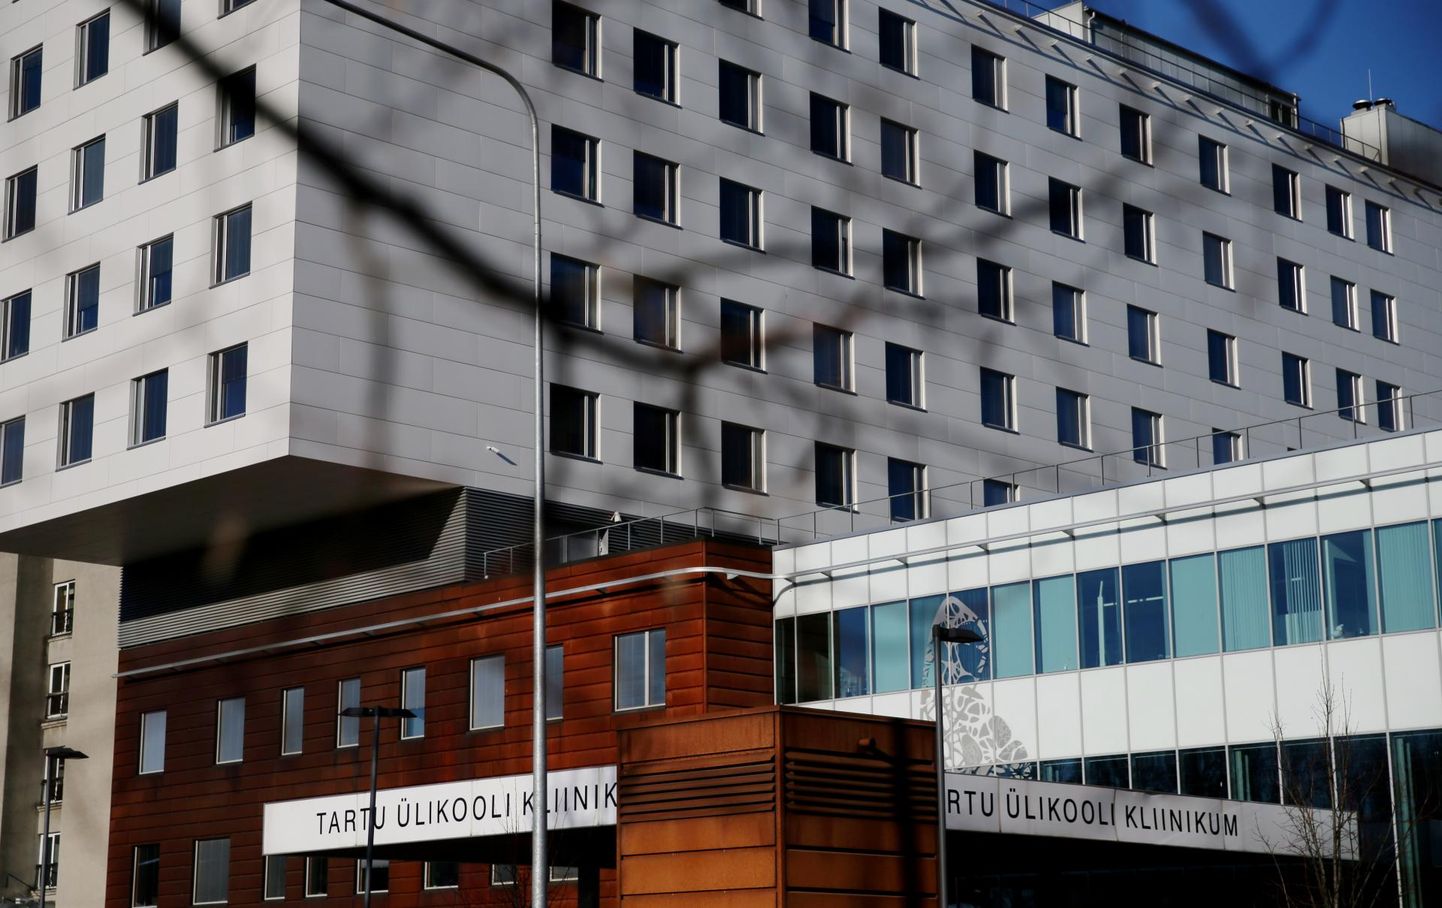 At the University of Tartu clinic, state procurement procedures were violated last year for purchases with a total amount of nearly five million euros.